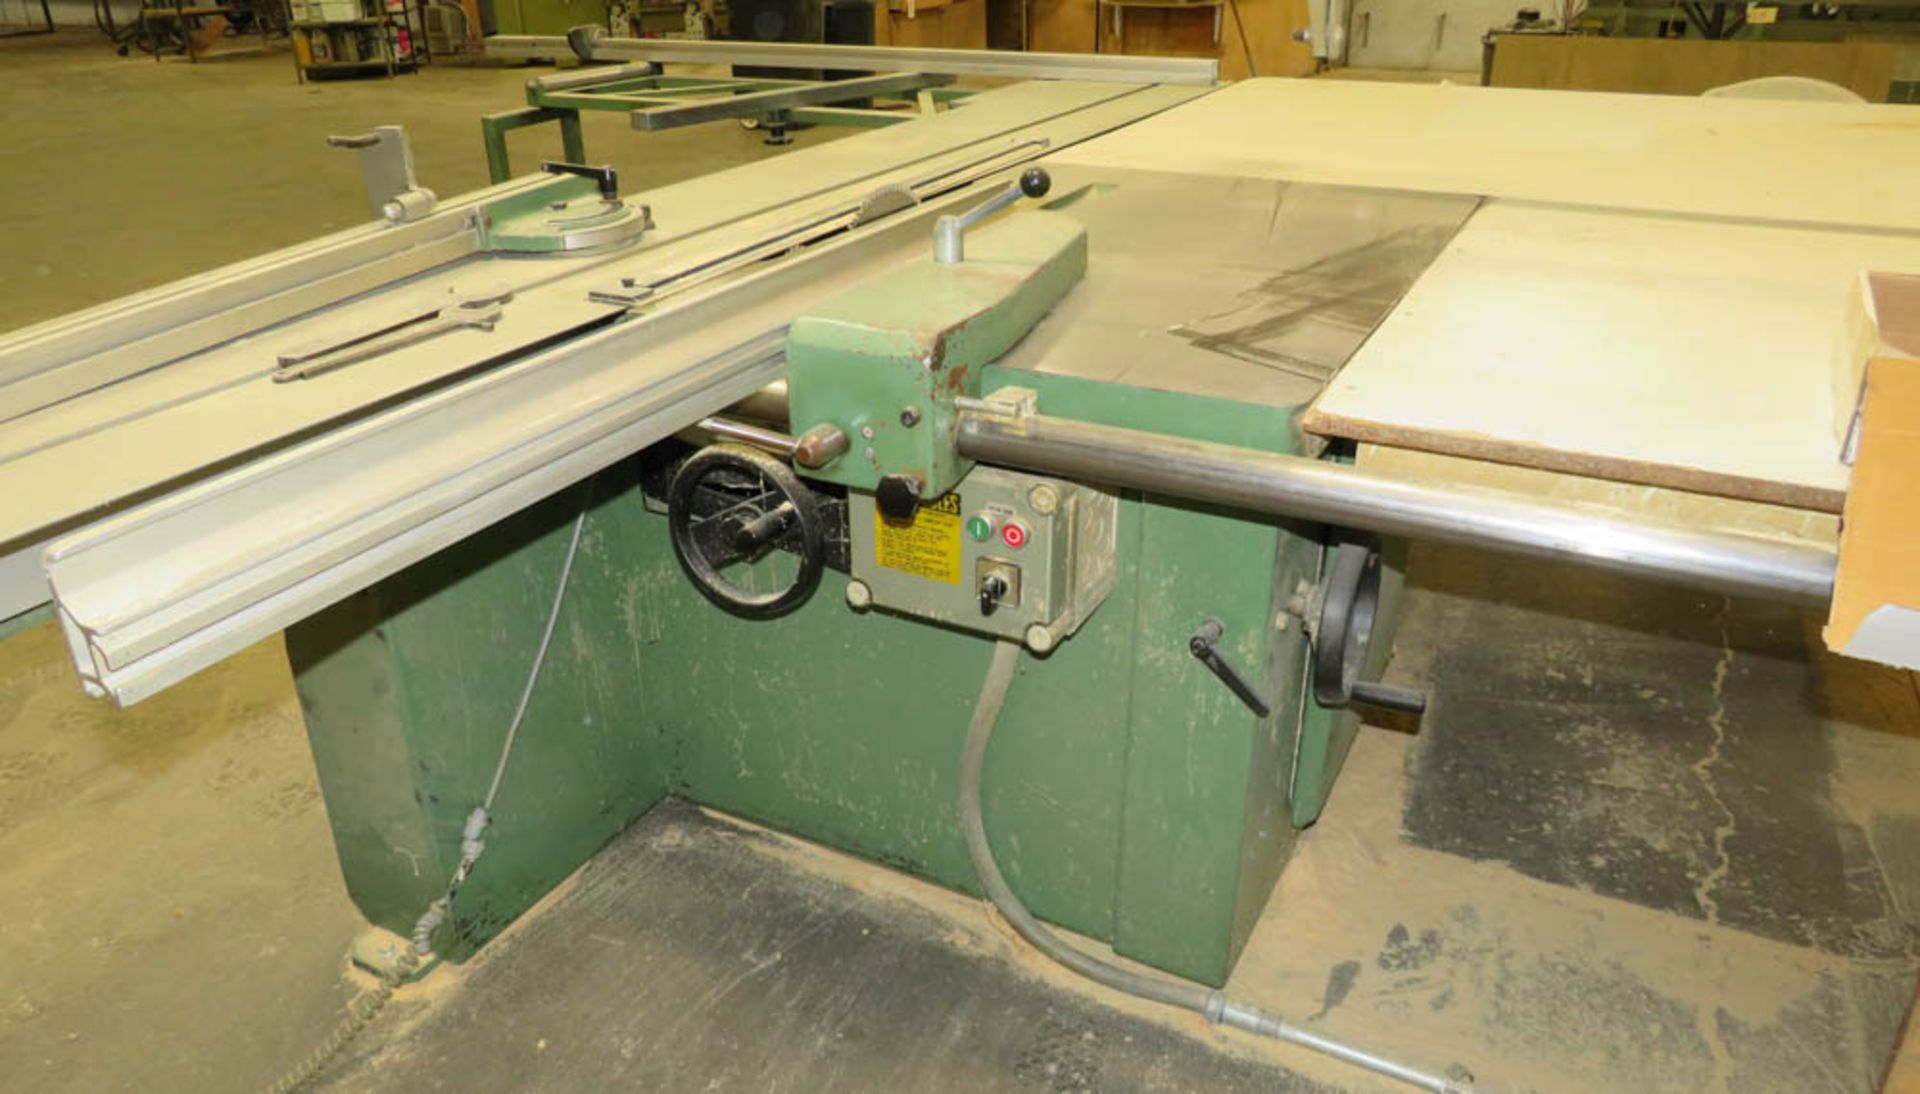 WADKIN MDL. CP32 SLIDING TABLE SAW, 9HP, 126" X 74" TABLE WITH GRIZZLY 3HP DUST COLLECTION SYSTEM, - Image 7 of 9